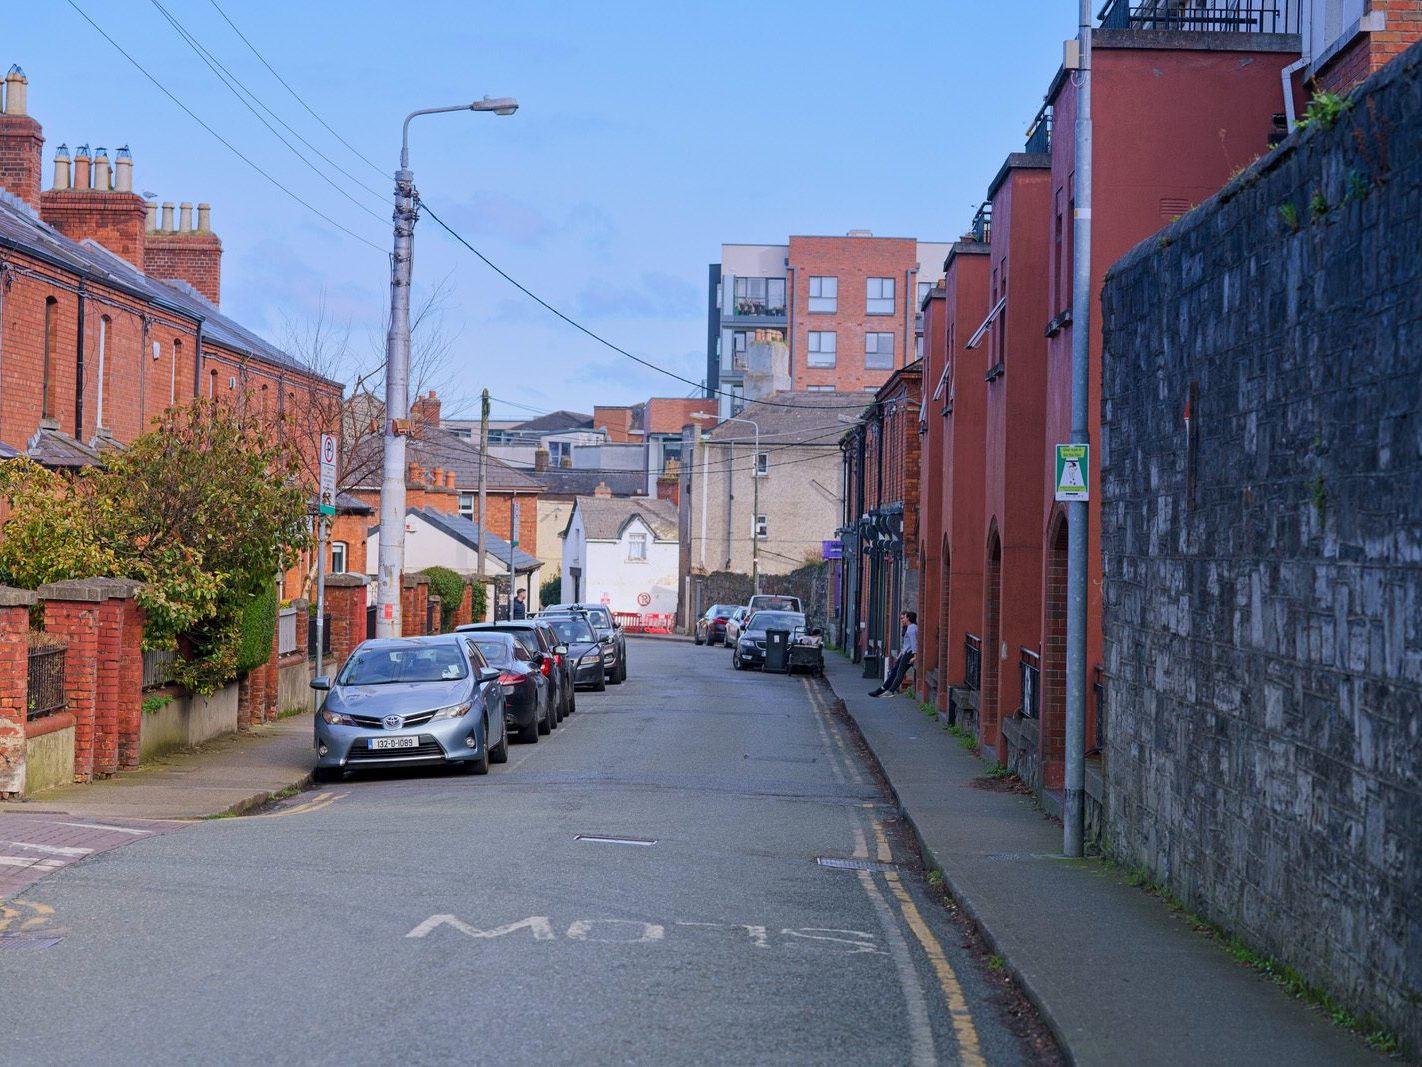 ARBOUR HILL AND STONEYBATTER [DUBLIN 7 COMMUNITIES WITH A UNIQUE BUT DIVERSE HISTORY]-228742-1